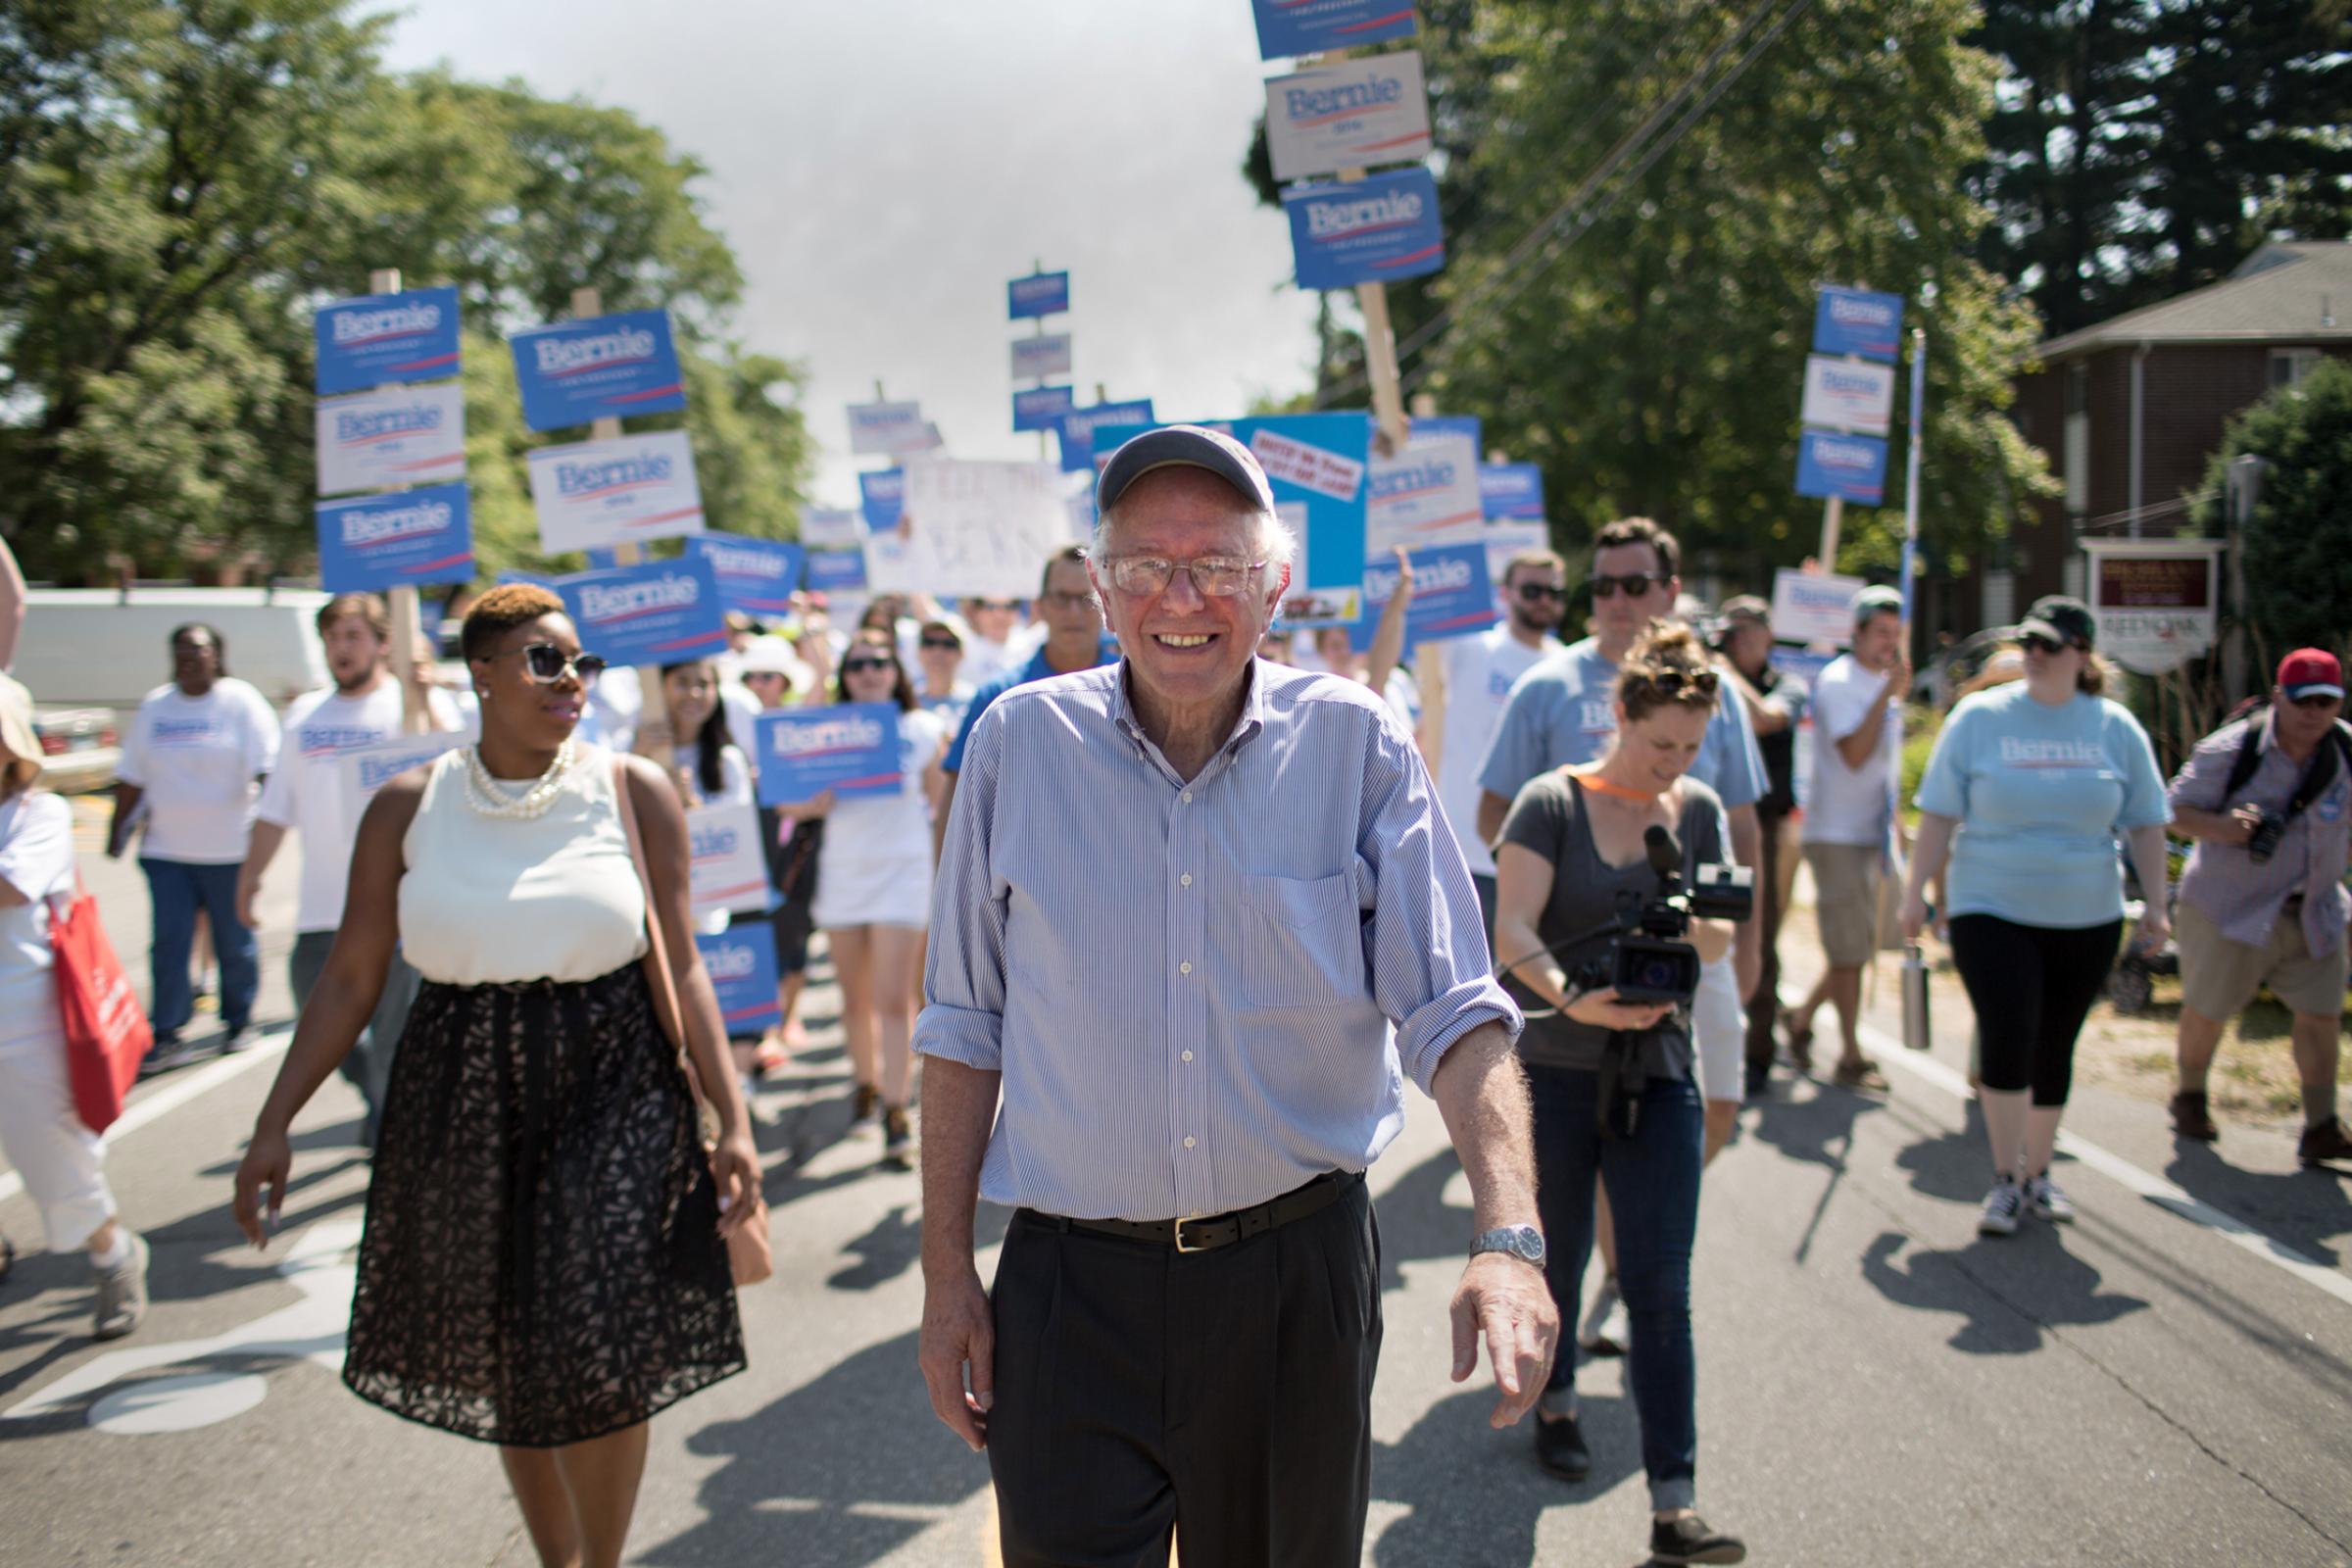 Senator Bernie Sanders and his national press secretary Symone Sanders (no relation) march in the Labor Day parade in Milford, NH.